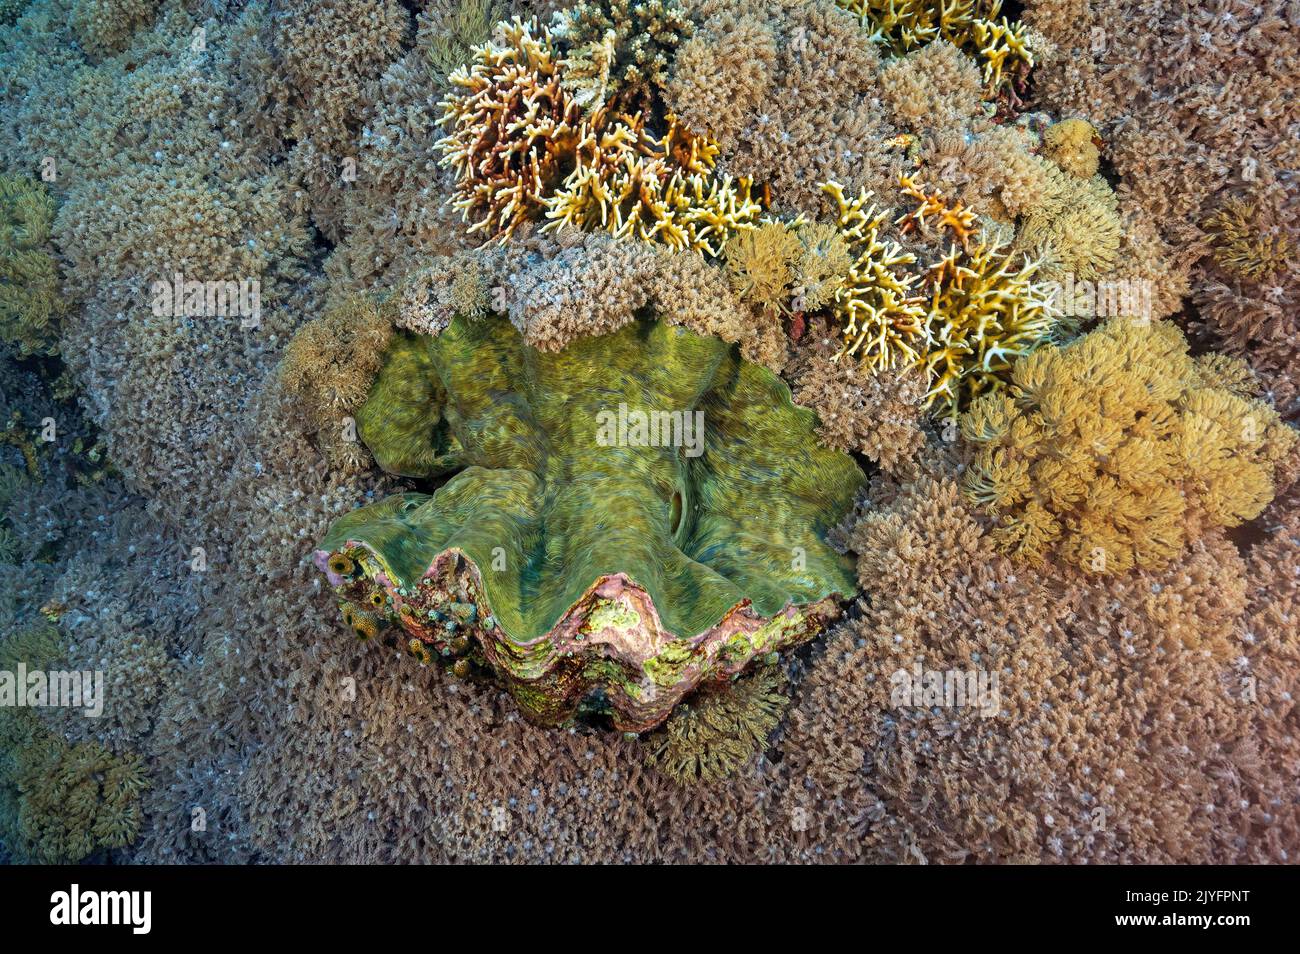 Giant clam, Tridacna gigas, surrounded by soft corals, Clavularia viridis, Raja Ampat Indonesia. Stock Photo